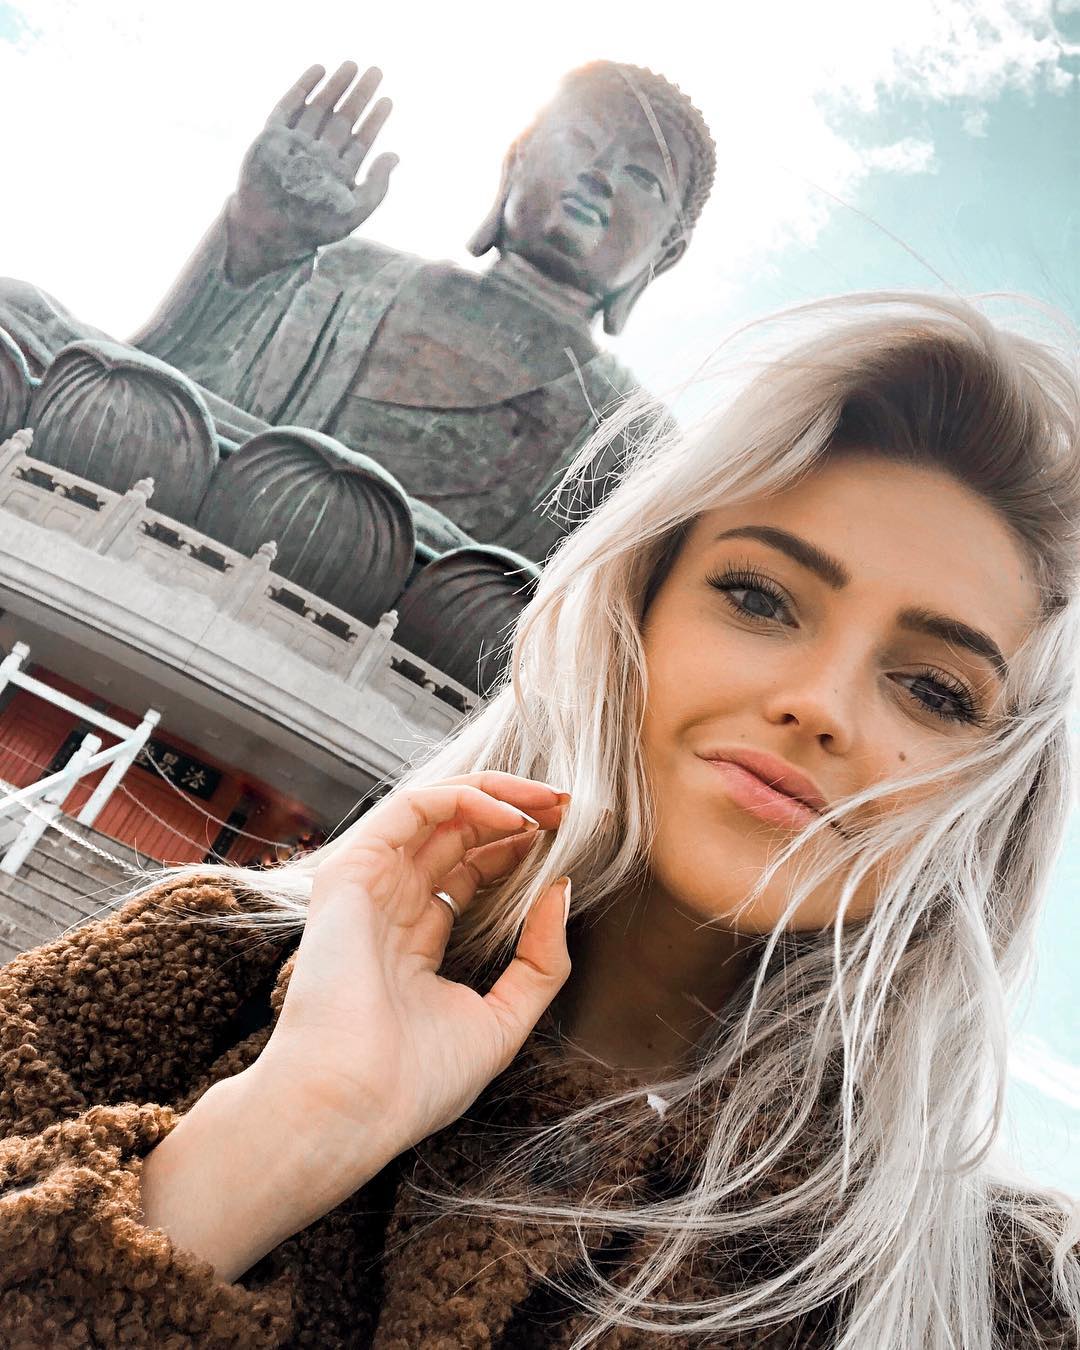 Morgan likes to travel and click photos on different places. here she has visited Tian Tan Buddha